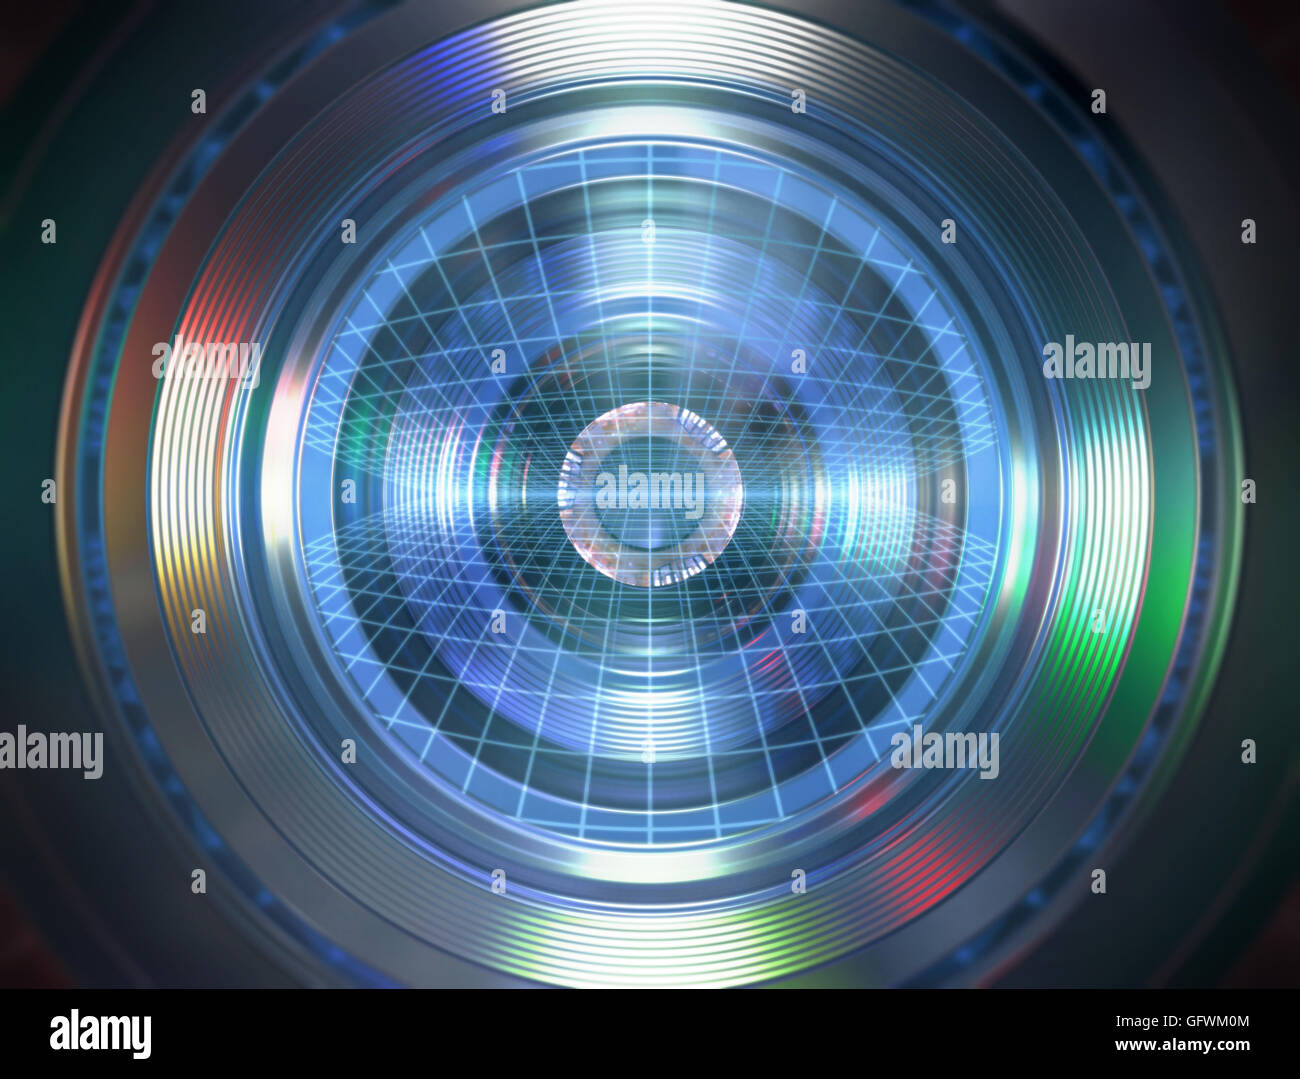 3D illustration. Robotic eye with similarity to the human eye and elements of a photographic lens. Stock Photo